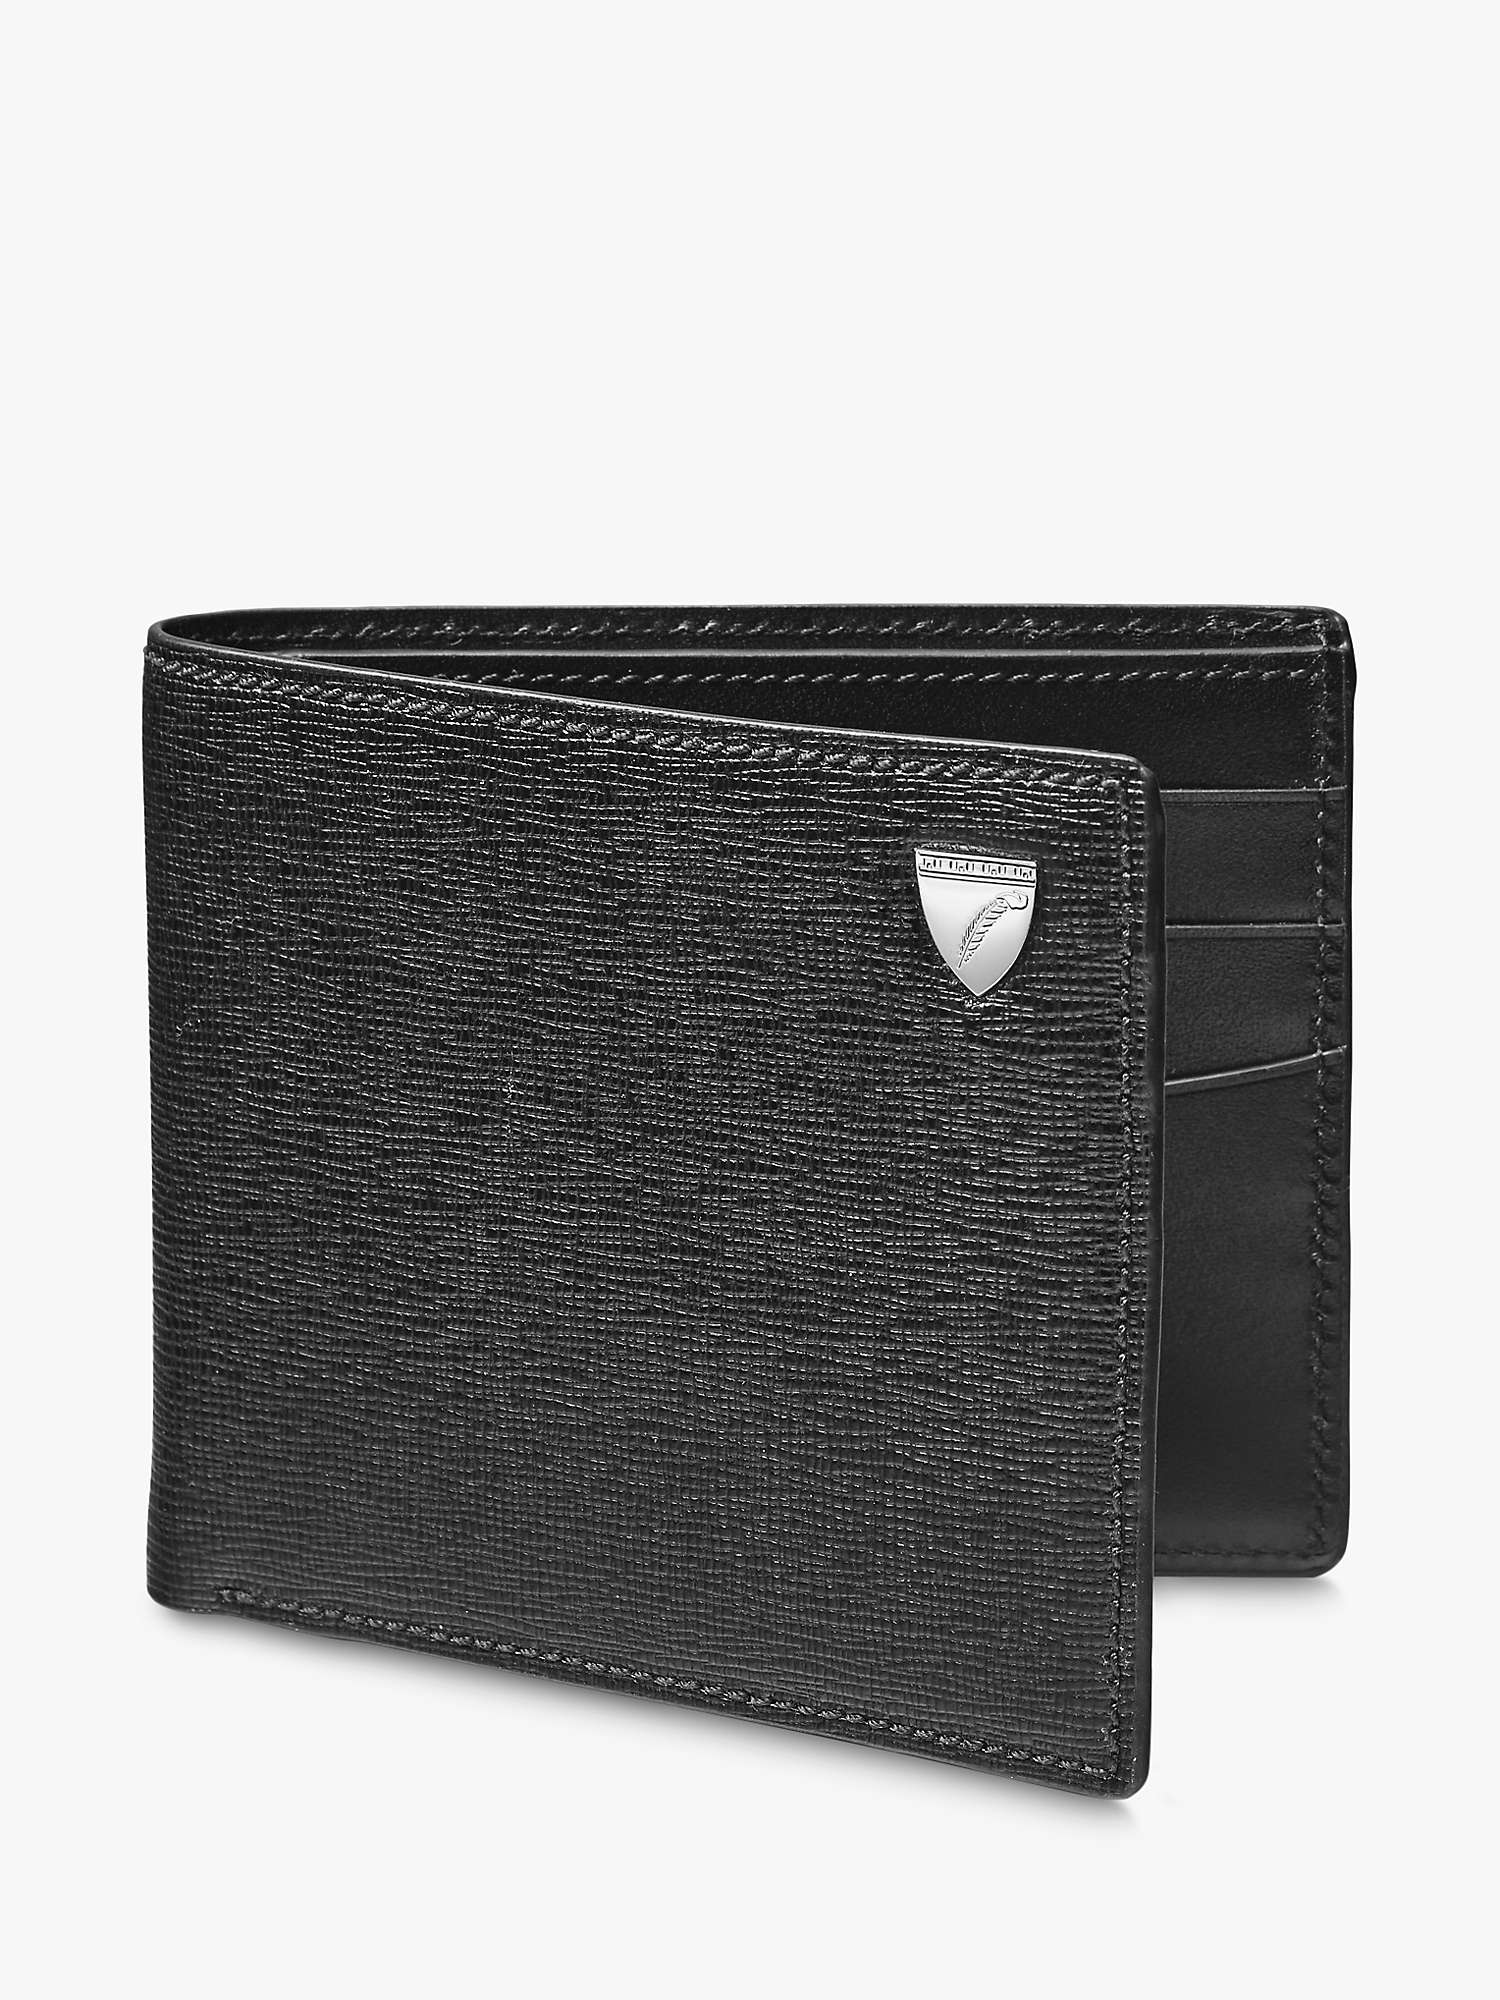 Buy Aspinal of London Billfold Saffiano Leather 6 Card Wallet Online at johnlewis.com